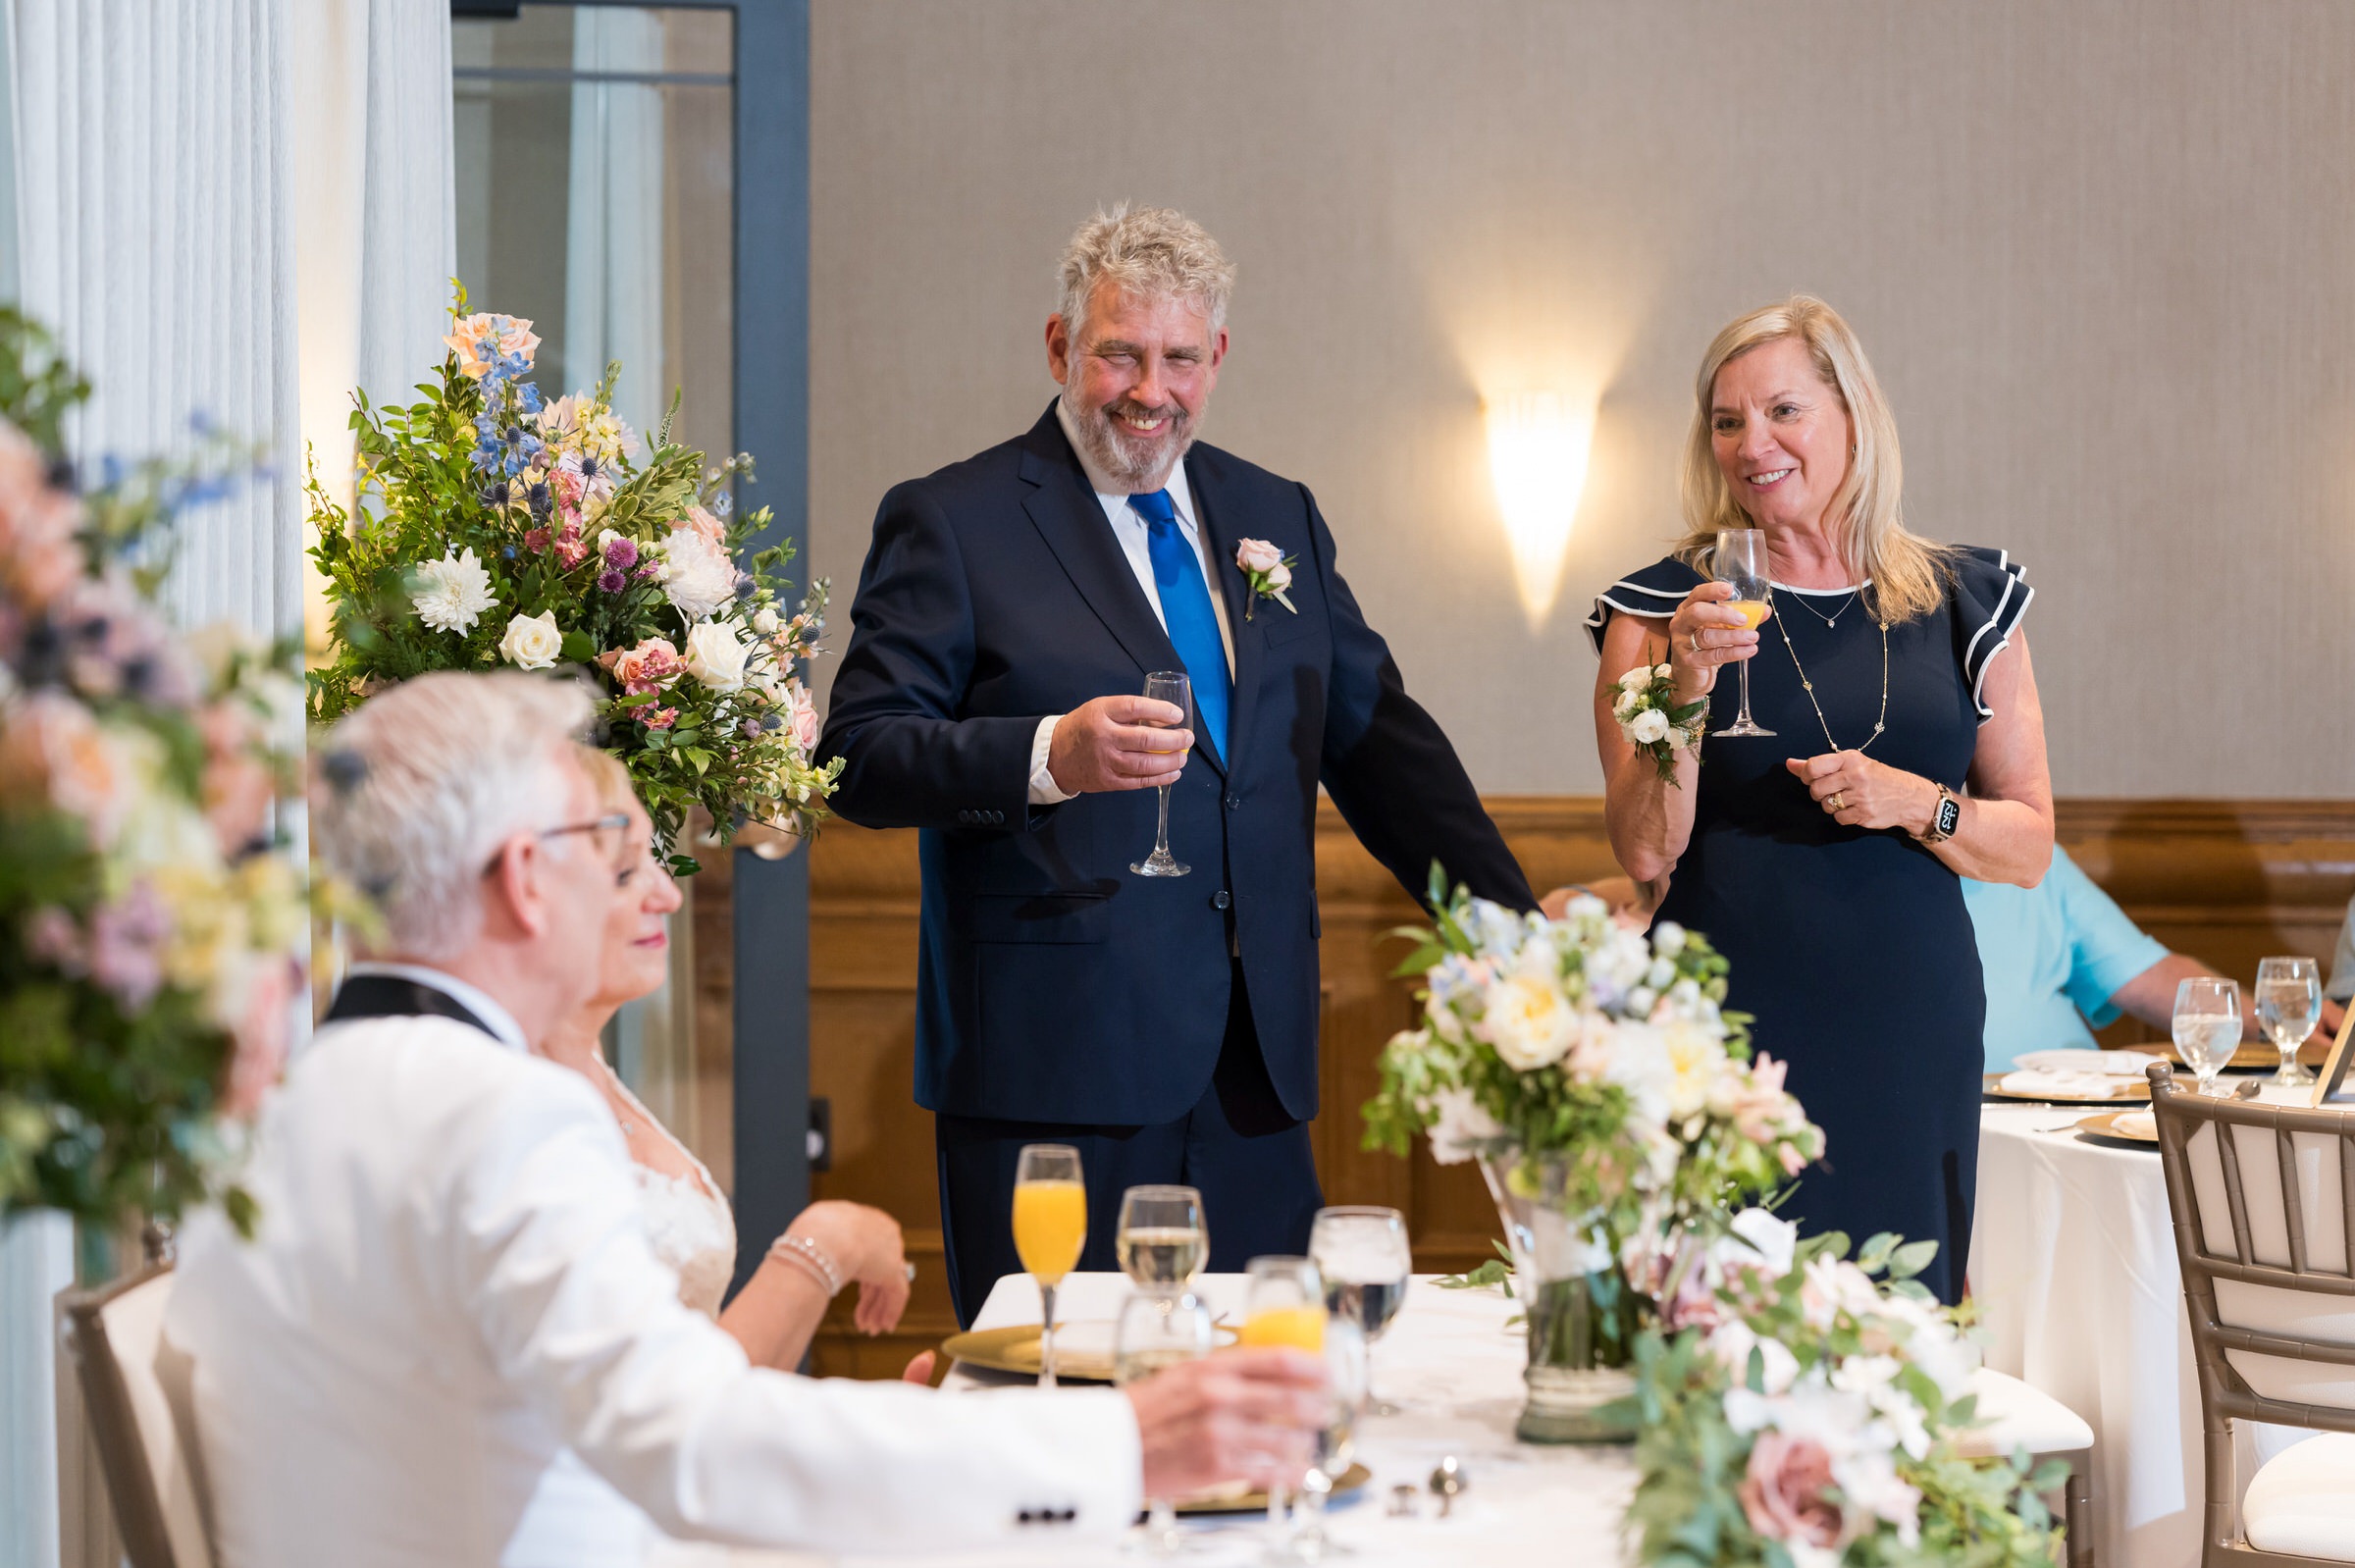 Guests toast the bride and groom at a private wedding at St. John's Resort.